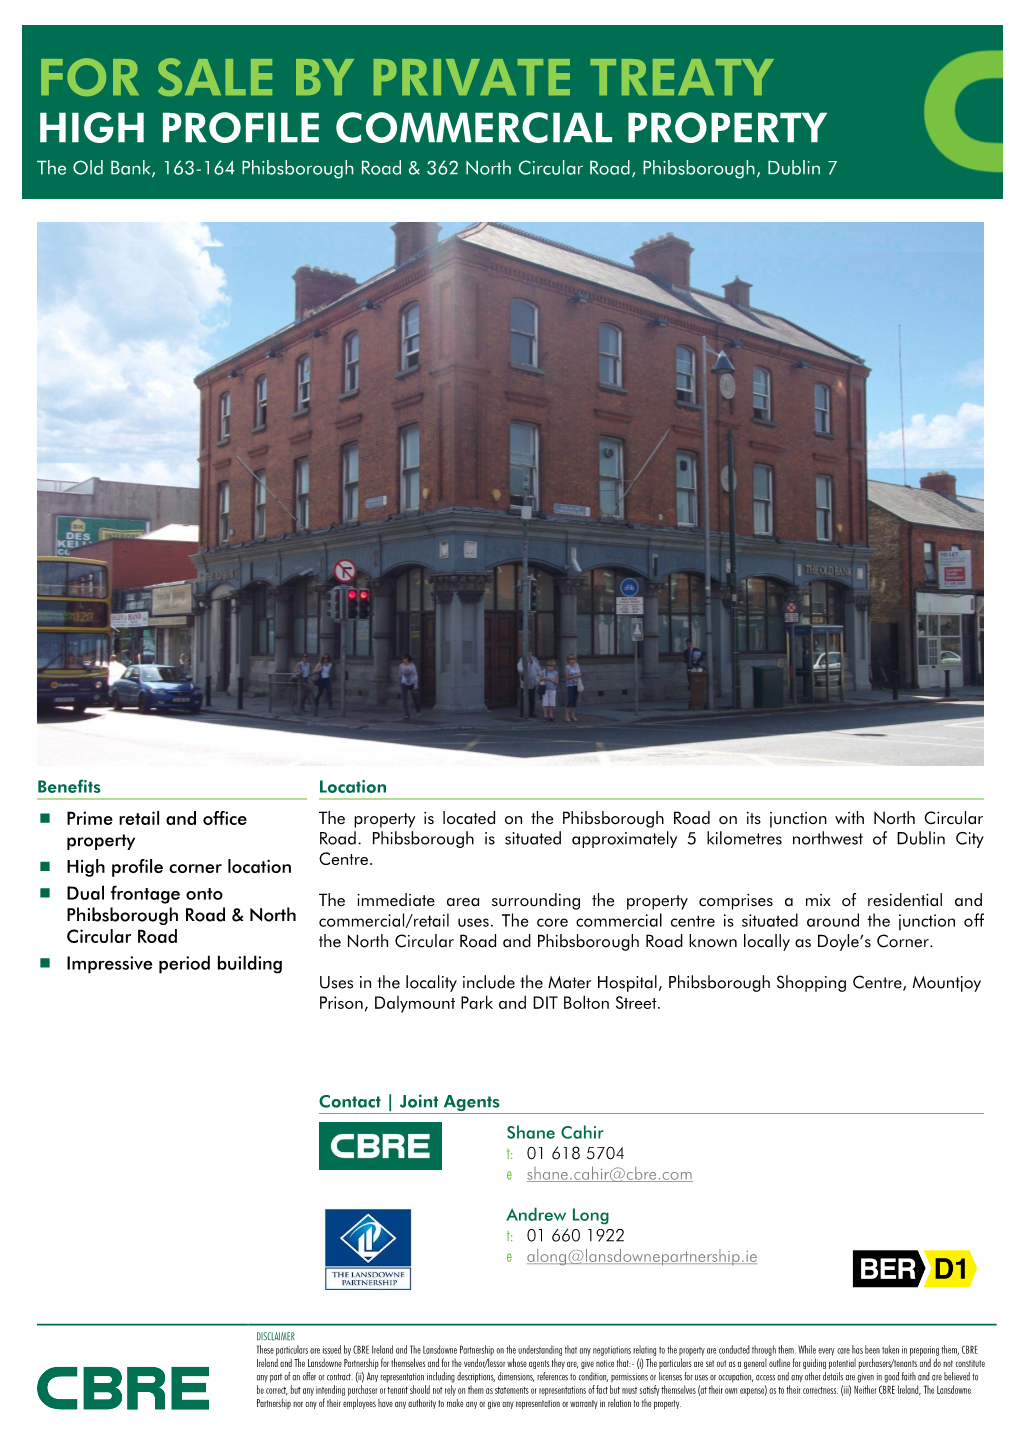 FOR SALE by PRIVATE TREATY HIGH PROFILE COMMERCIAL PROPERTY the Old Bank, 163-164 Phibsborough Road & 362 North Circular Road, Phibsborough, Dublin 7